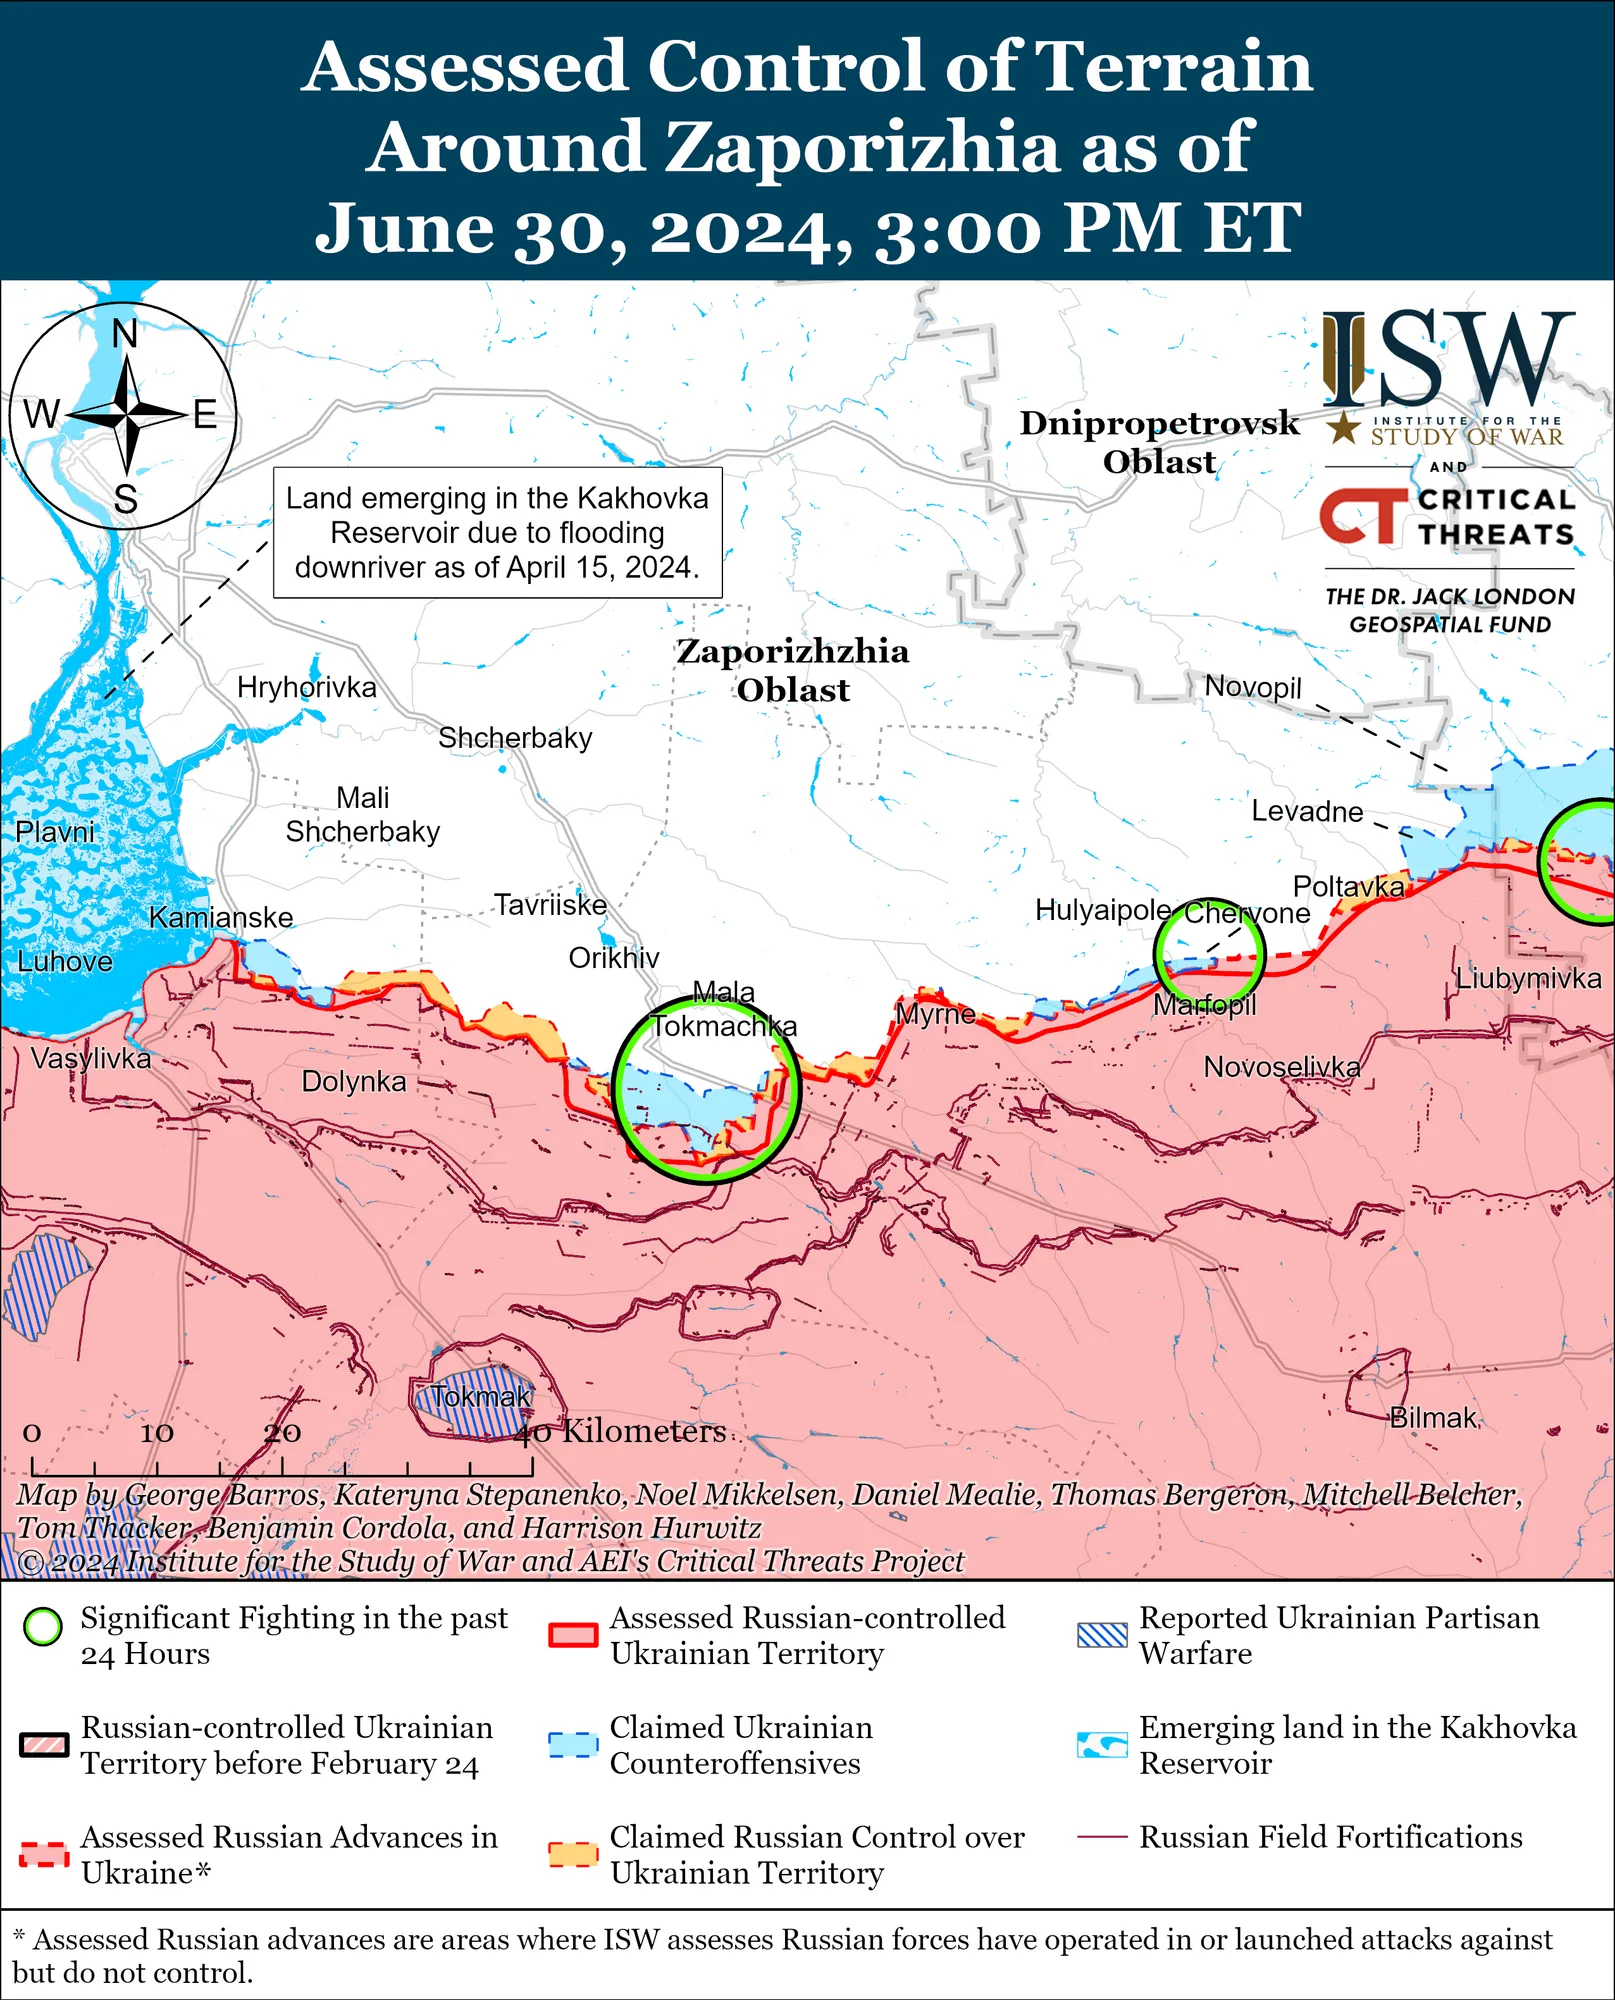 Putin is betting on dragging out the war in Ukraine, but the West can thwart his plan: ISW names key factors